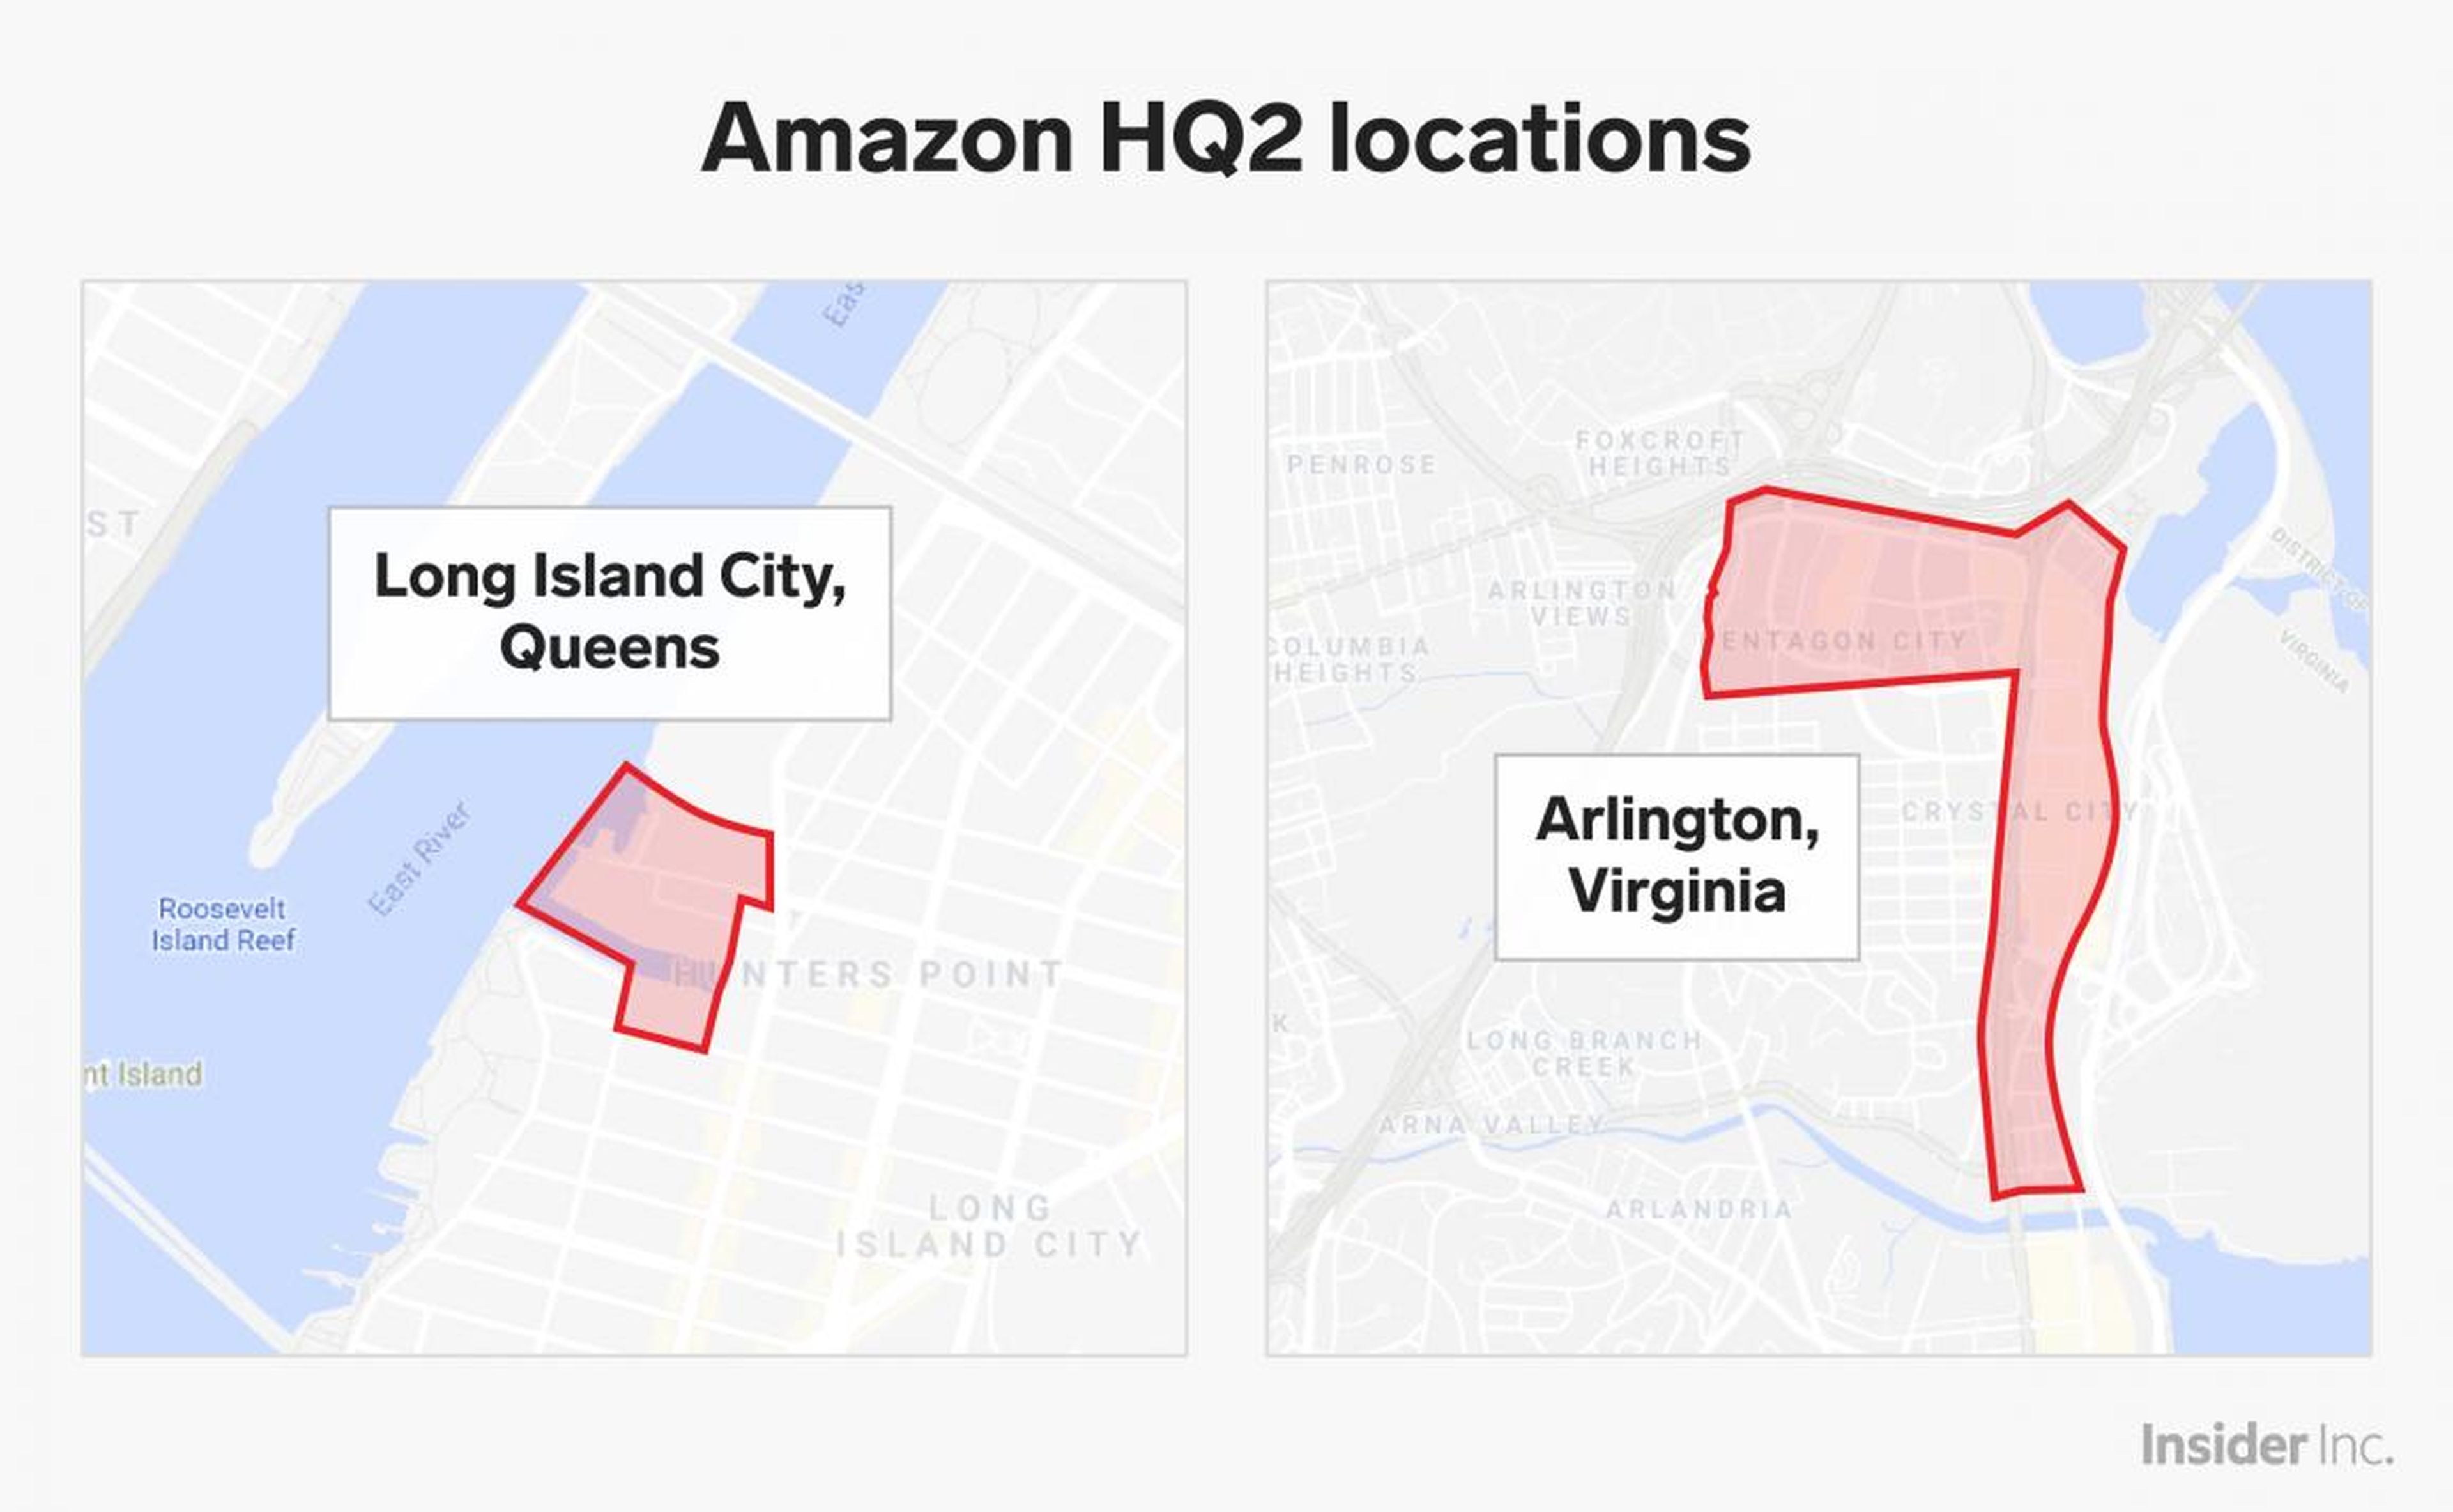 Amazon planned to split HQ2 between Long Island City and Northern Virginia.